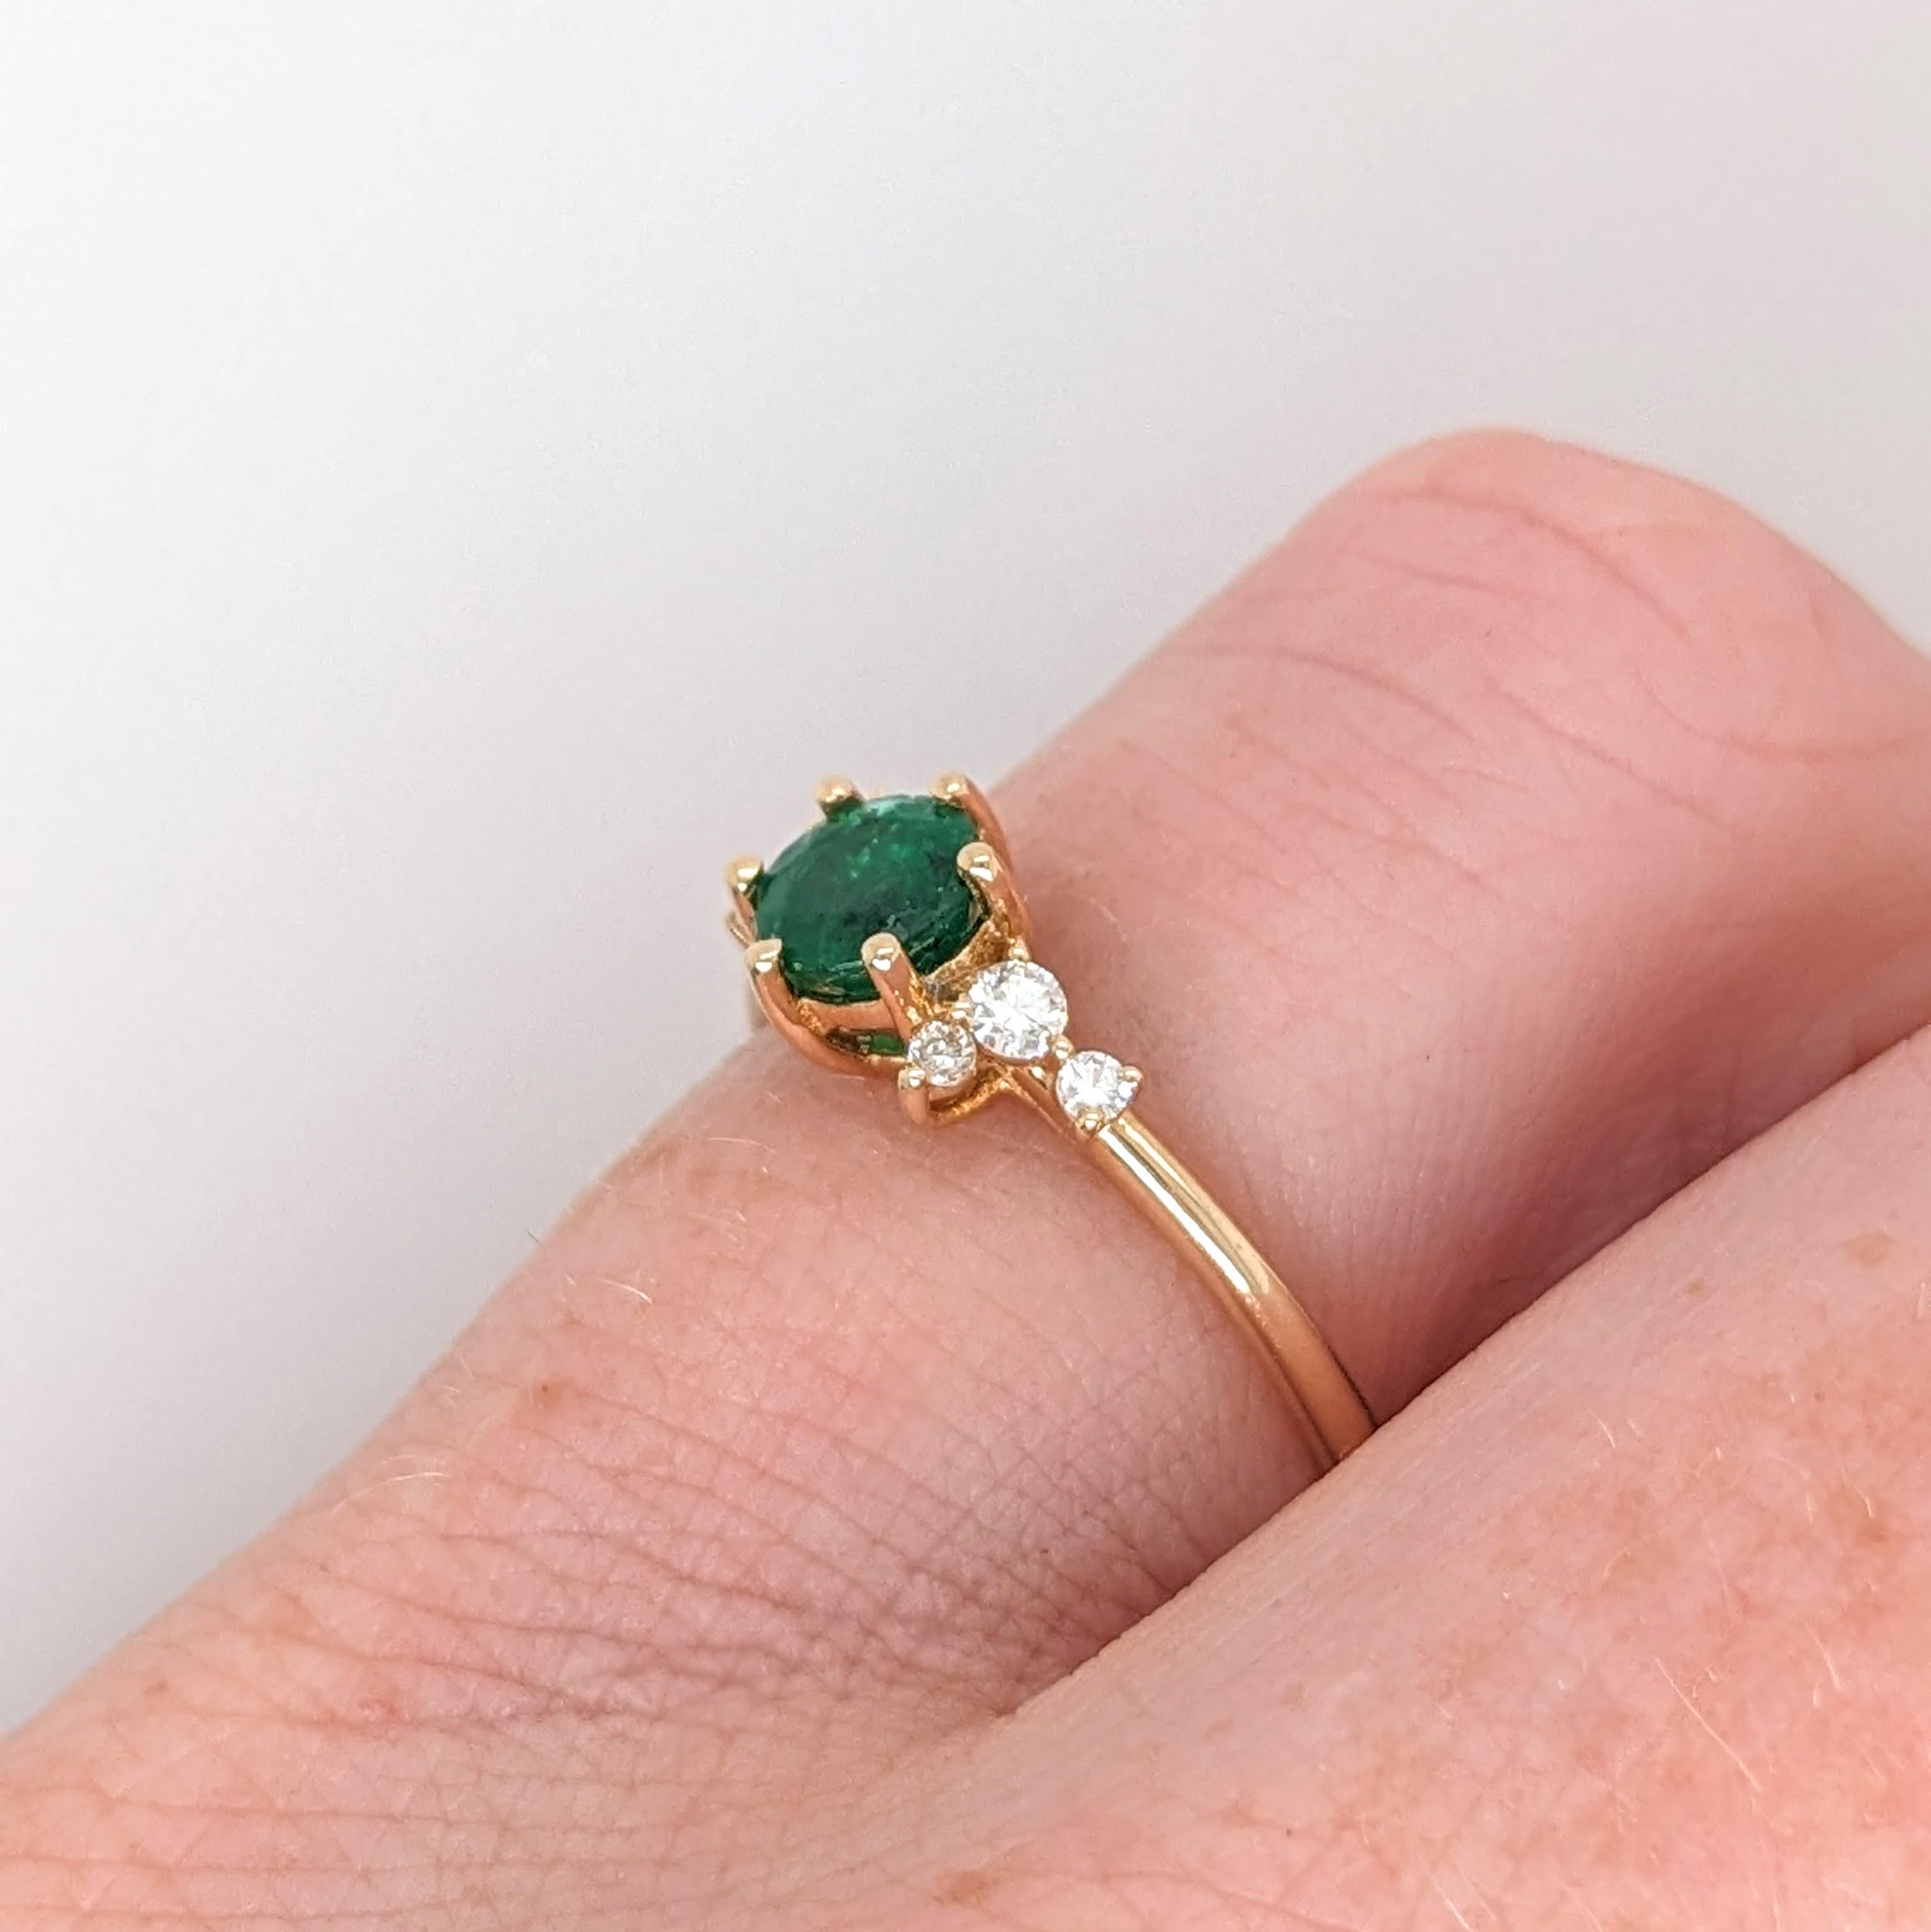 Green Emerald Ring w Earth Mined Diamonds in Solid 14k Yellow Gold Round 5mm 2